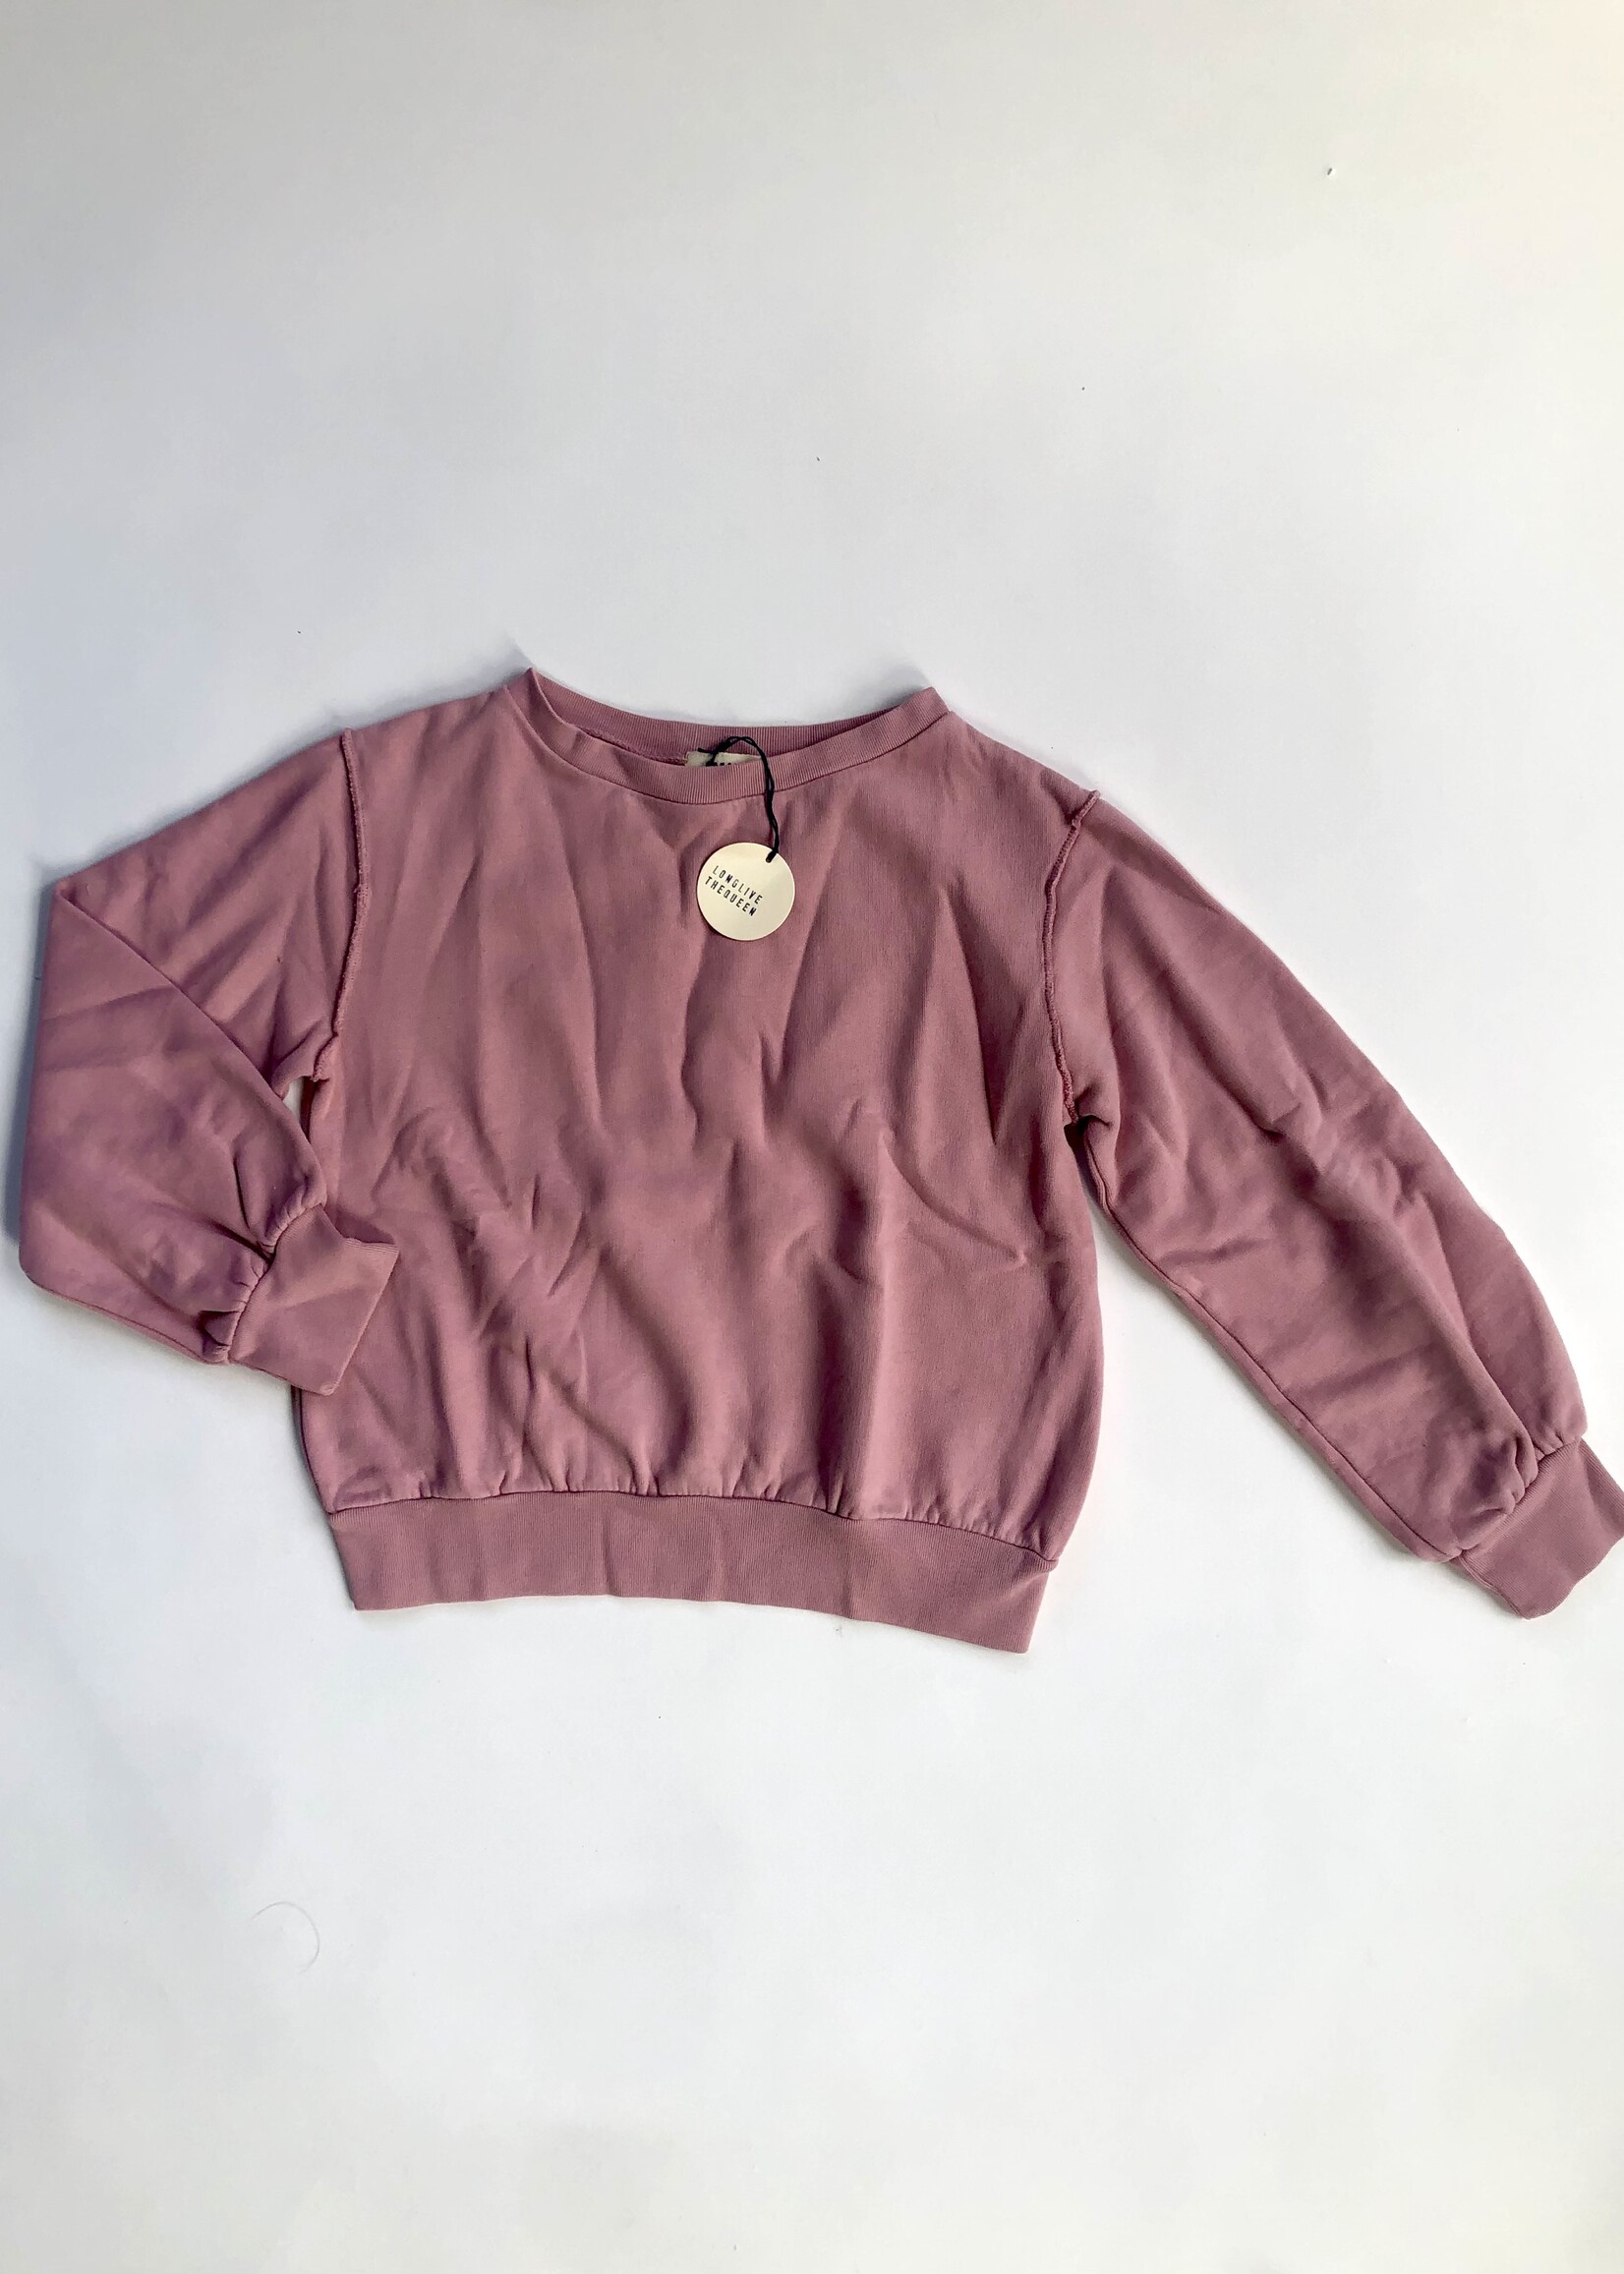 Long Live The Queen Soft pink sweater 6-8Y